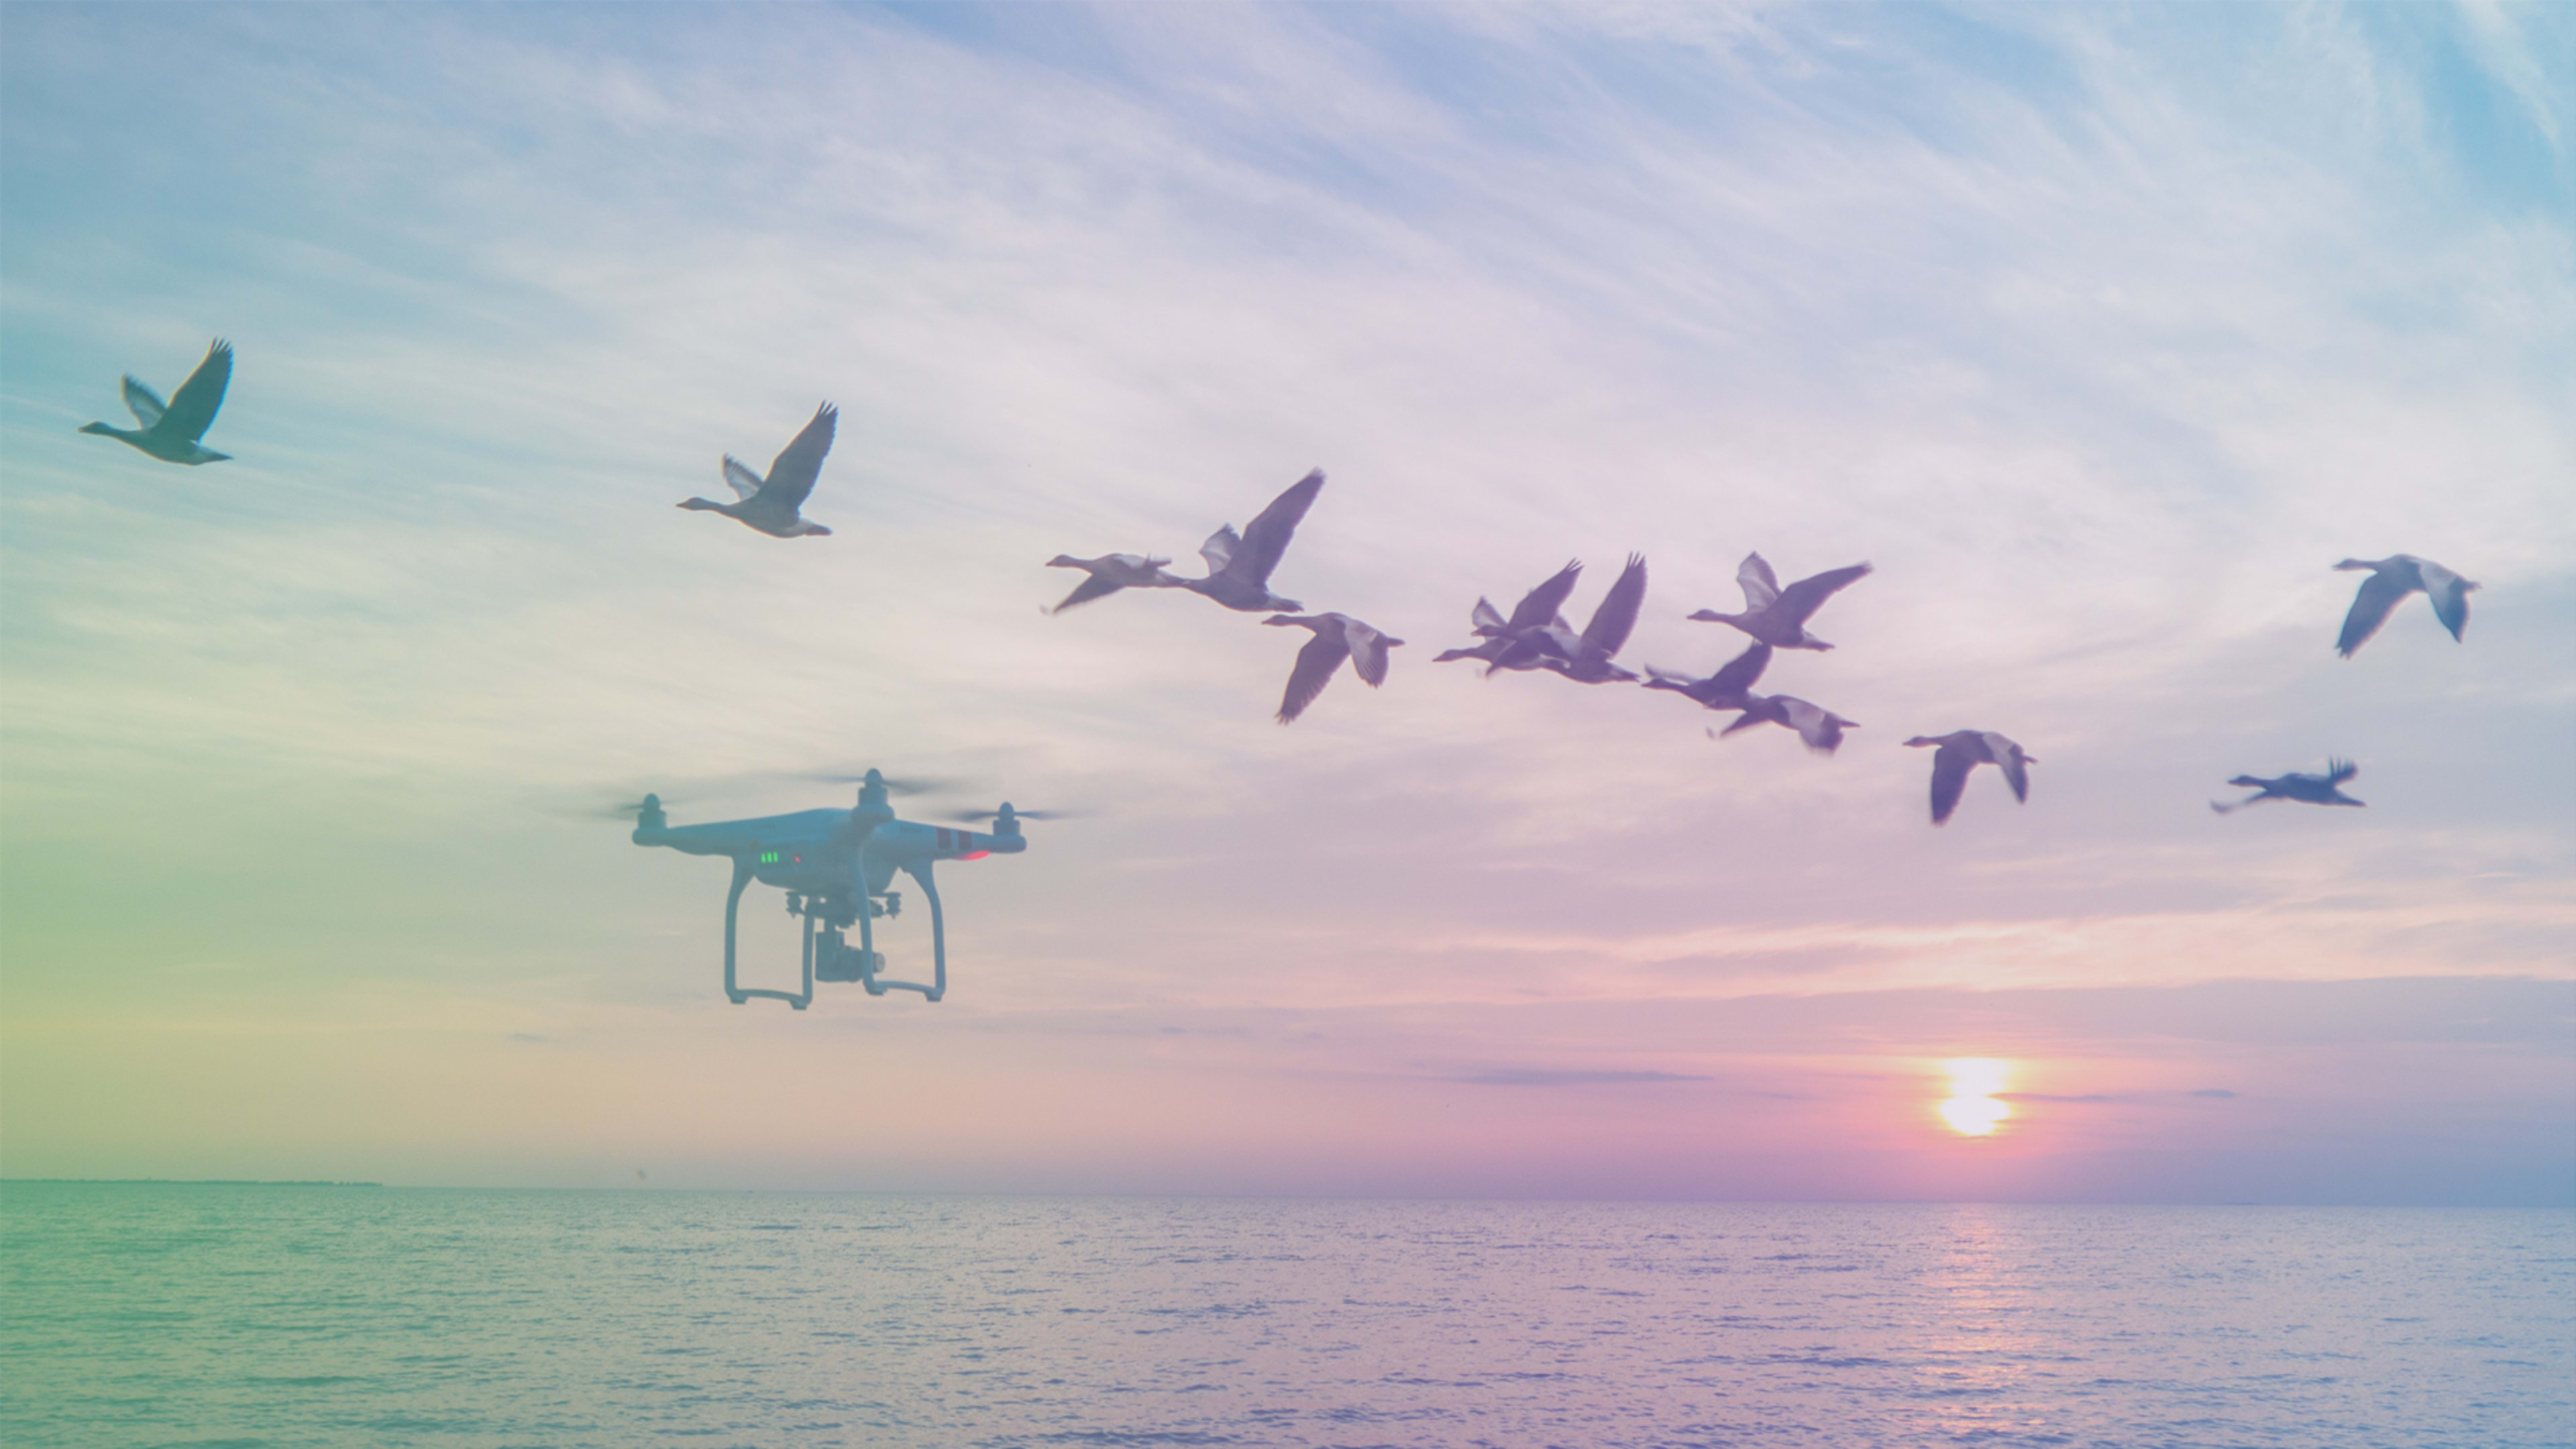 Bird-herding drones could make air travel even safer for people and birds